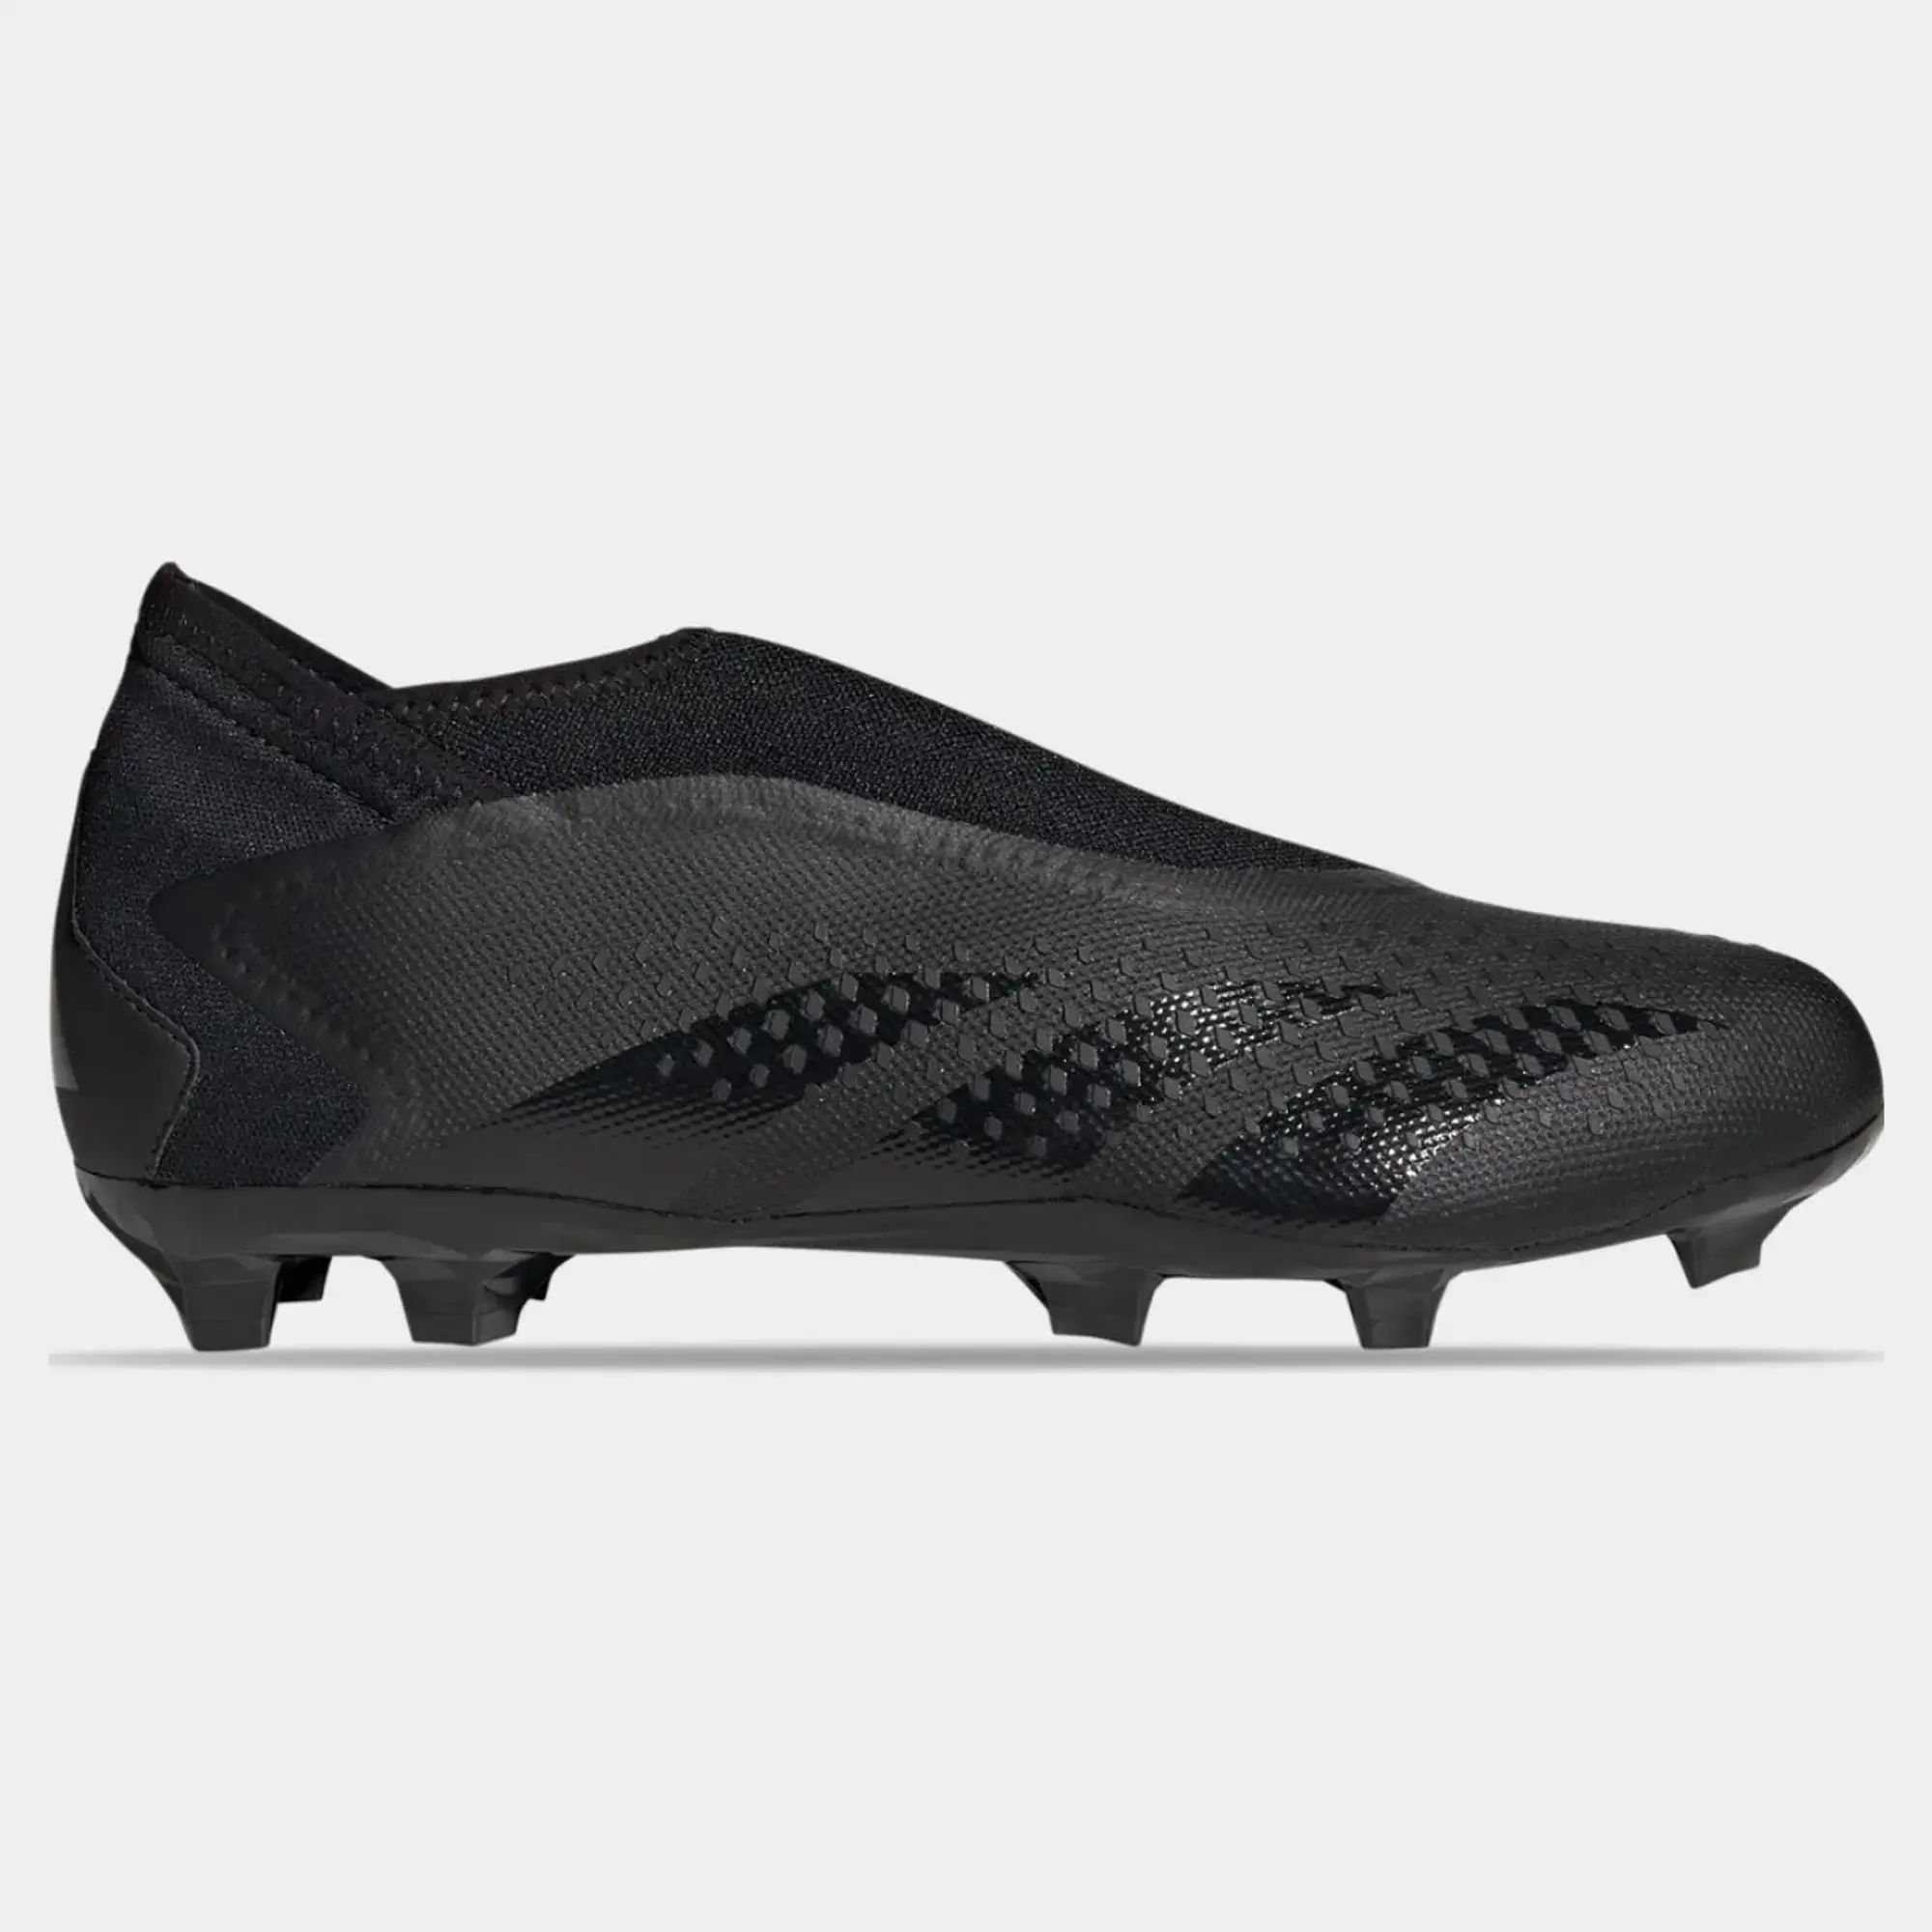 Adidas Predator Accuracy.3 Laceless Firm Ground Football Boots